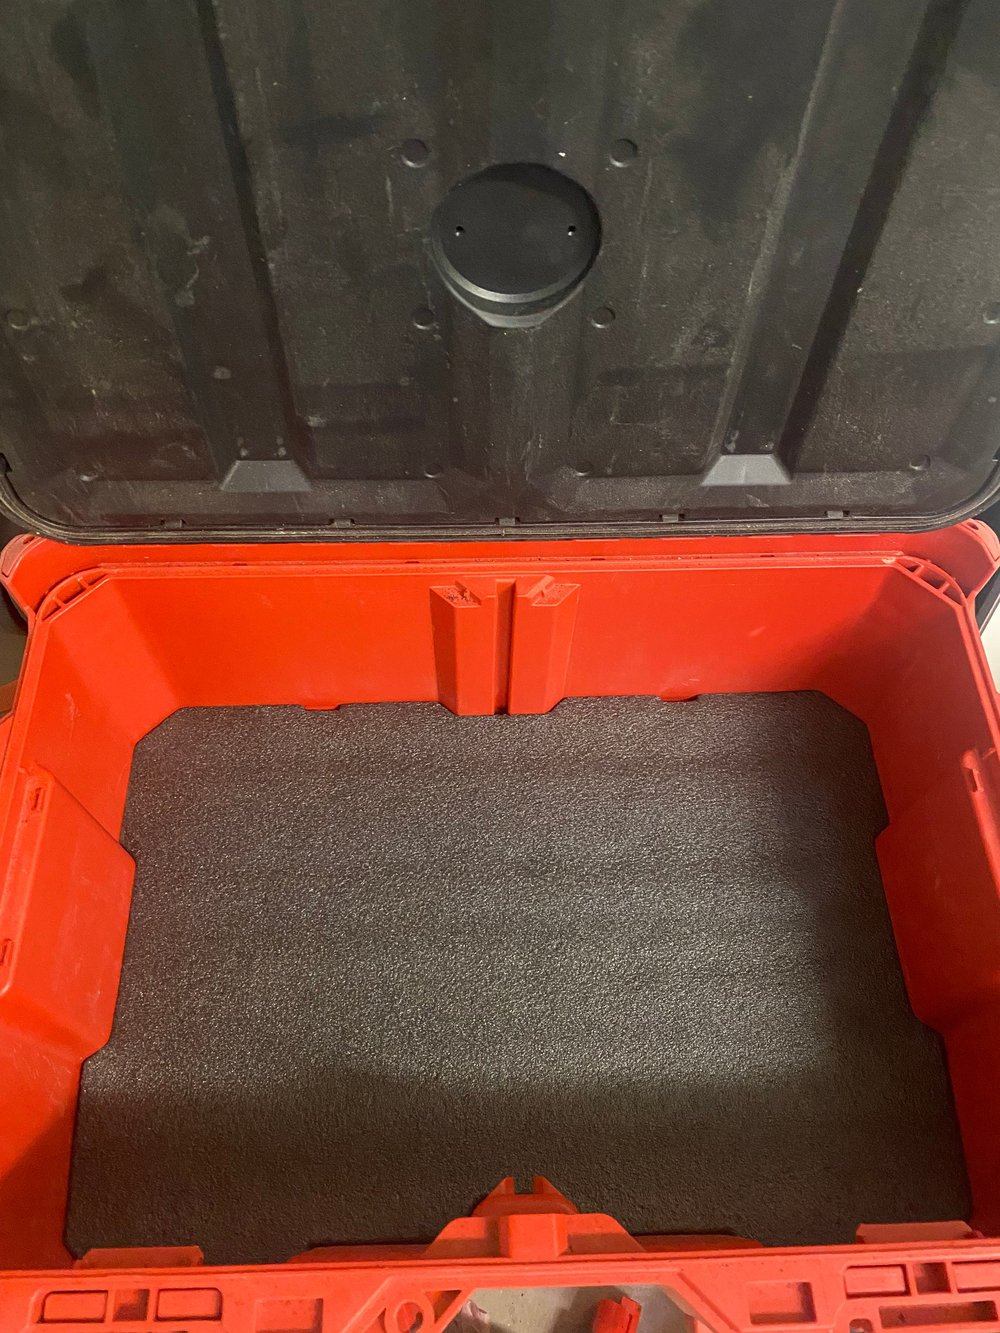 Kaizen Insert Compatible With Milwaukee Packout 48-22-8425 Large Tool Box Customizable  Foam Insert for Packout 